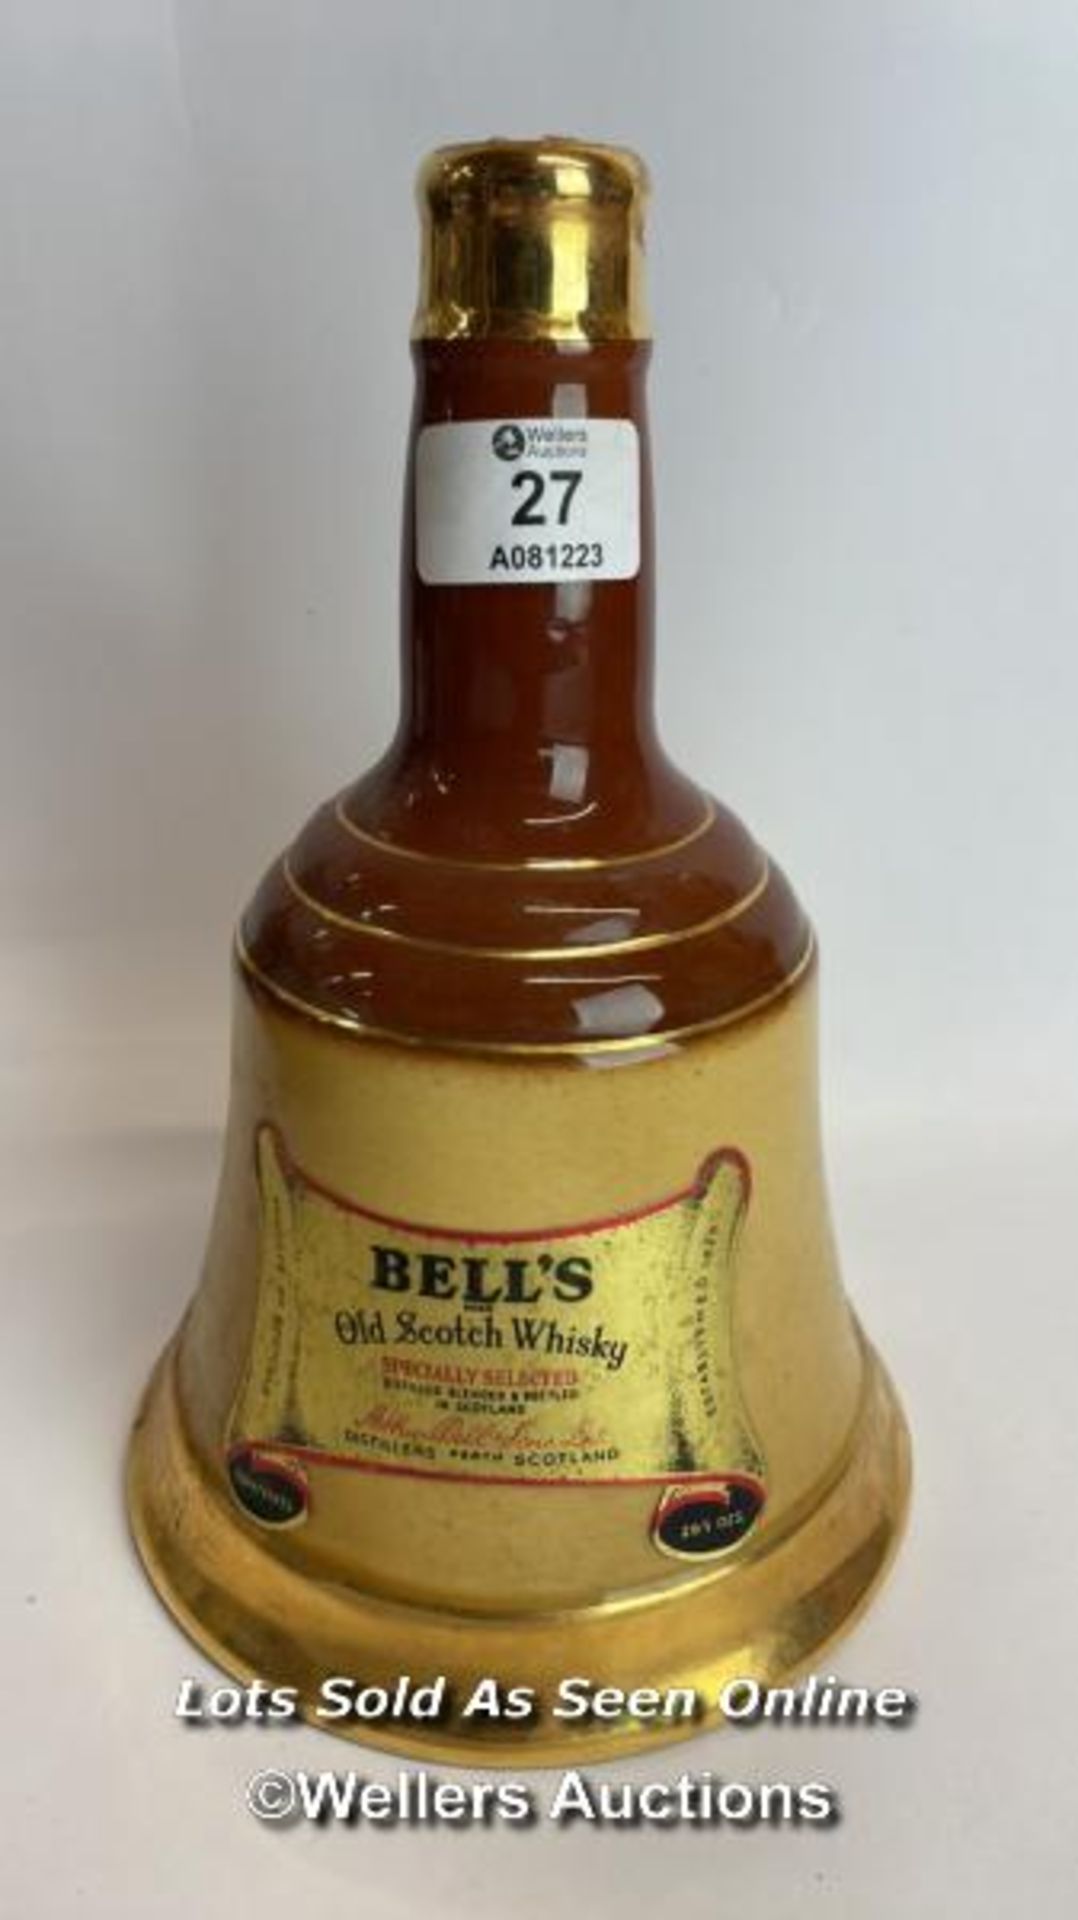 Bell's Specially Selected Blended Scotch Whisky, Bottle made by Wade, 26.5 OZ, 40% vol / Please